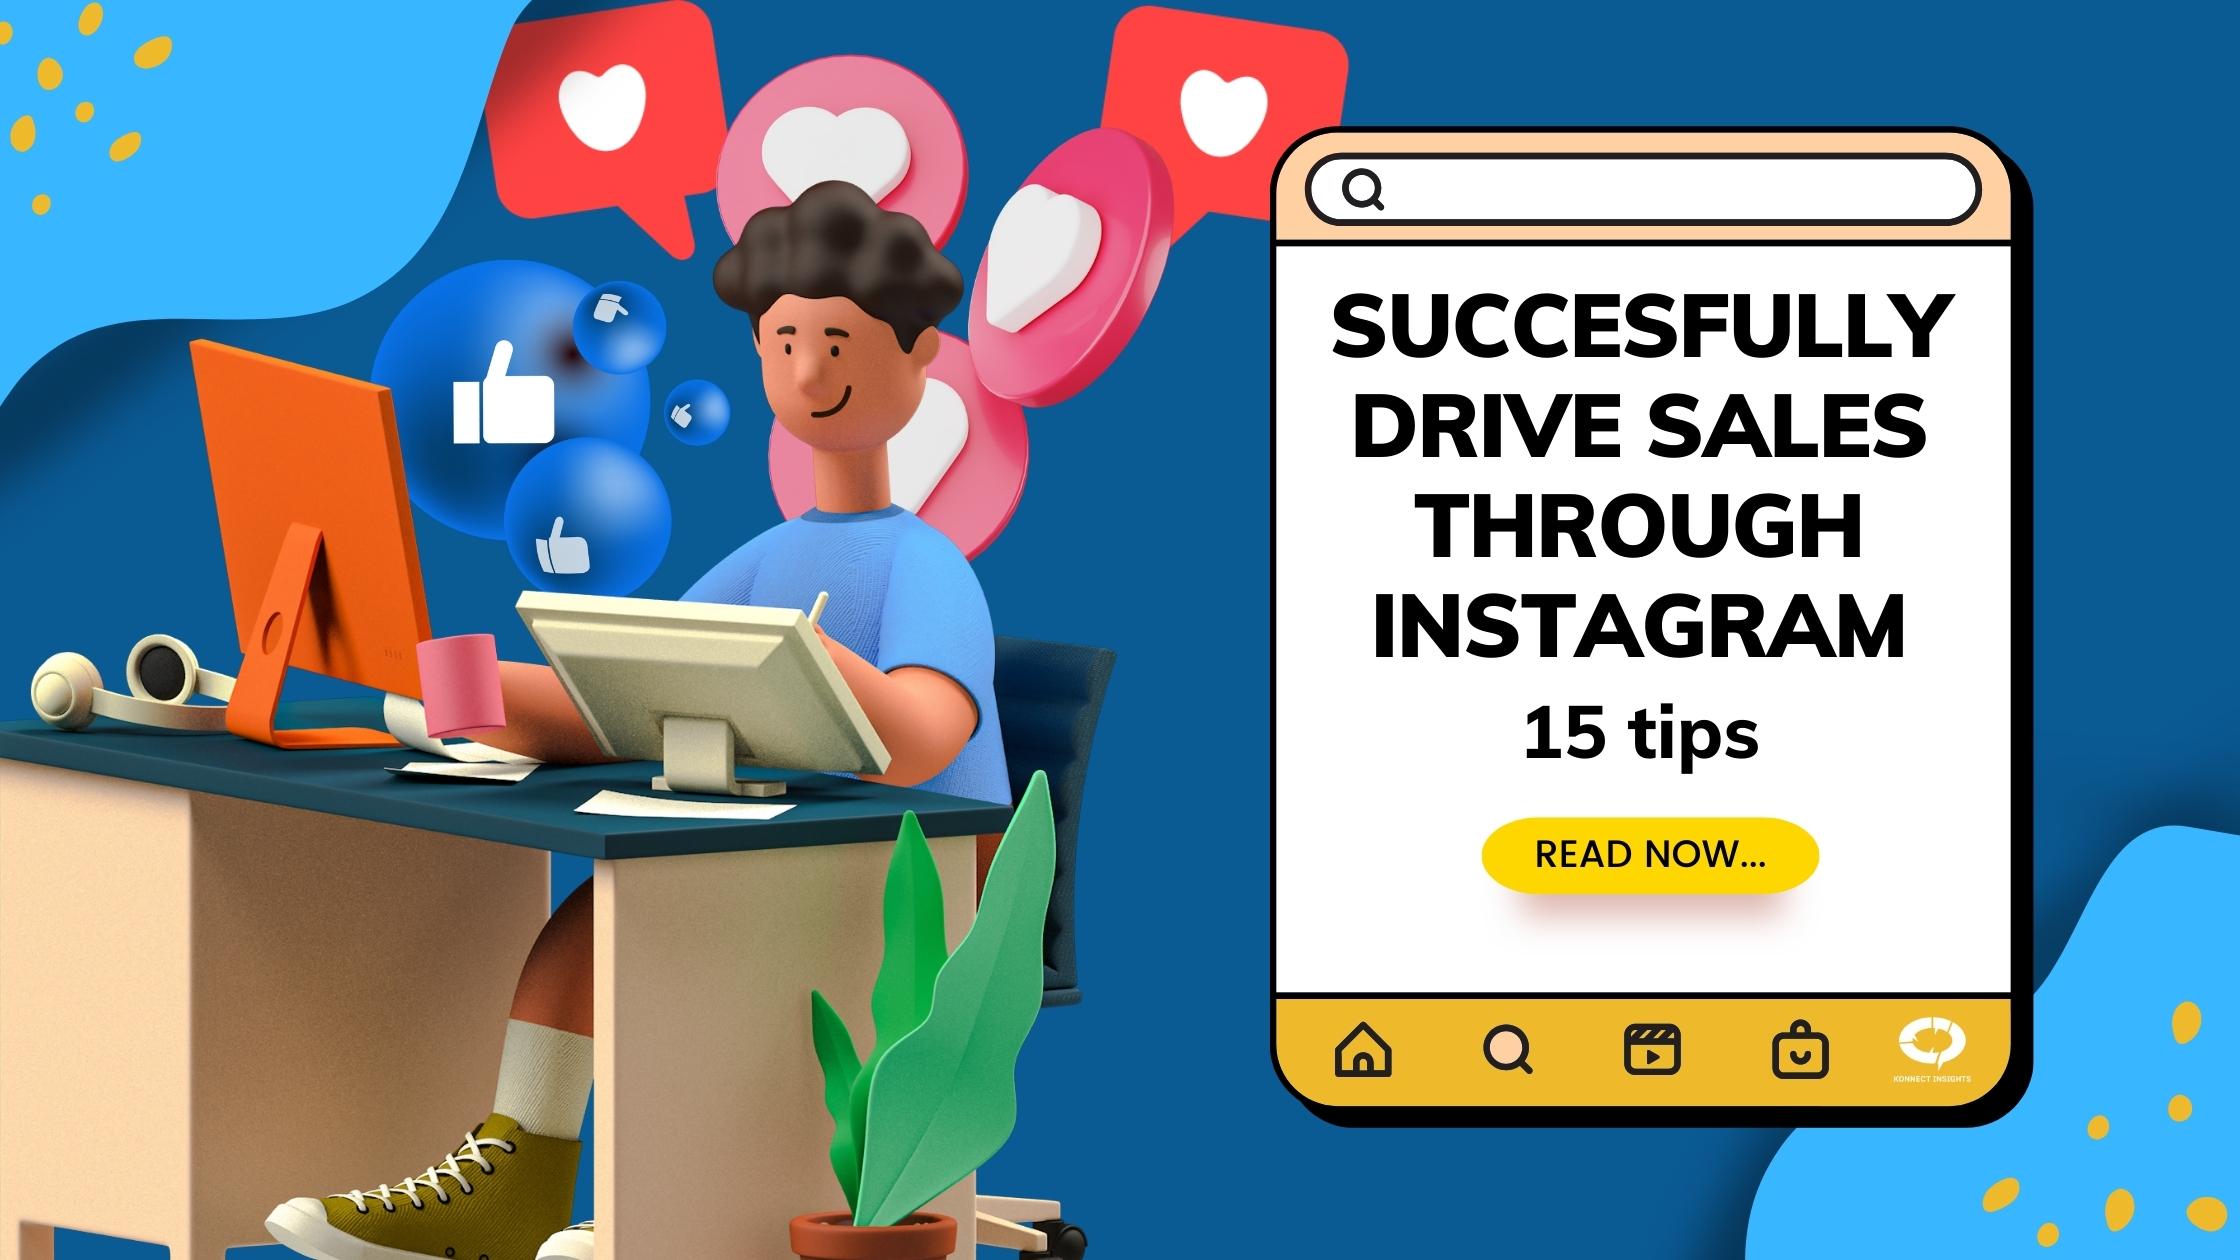 SUCCESFULLY DRIVE SALES THROUGH INSTAGRAM